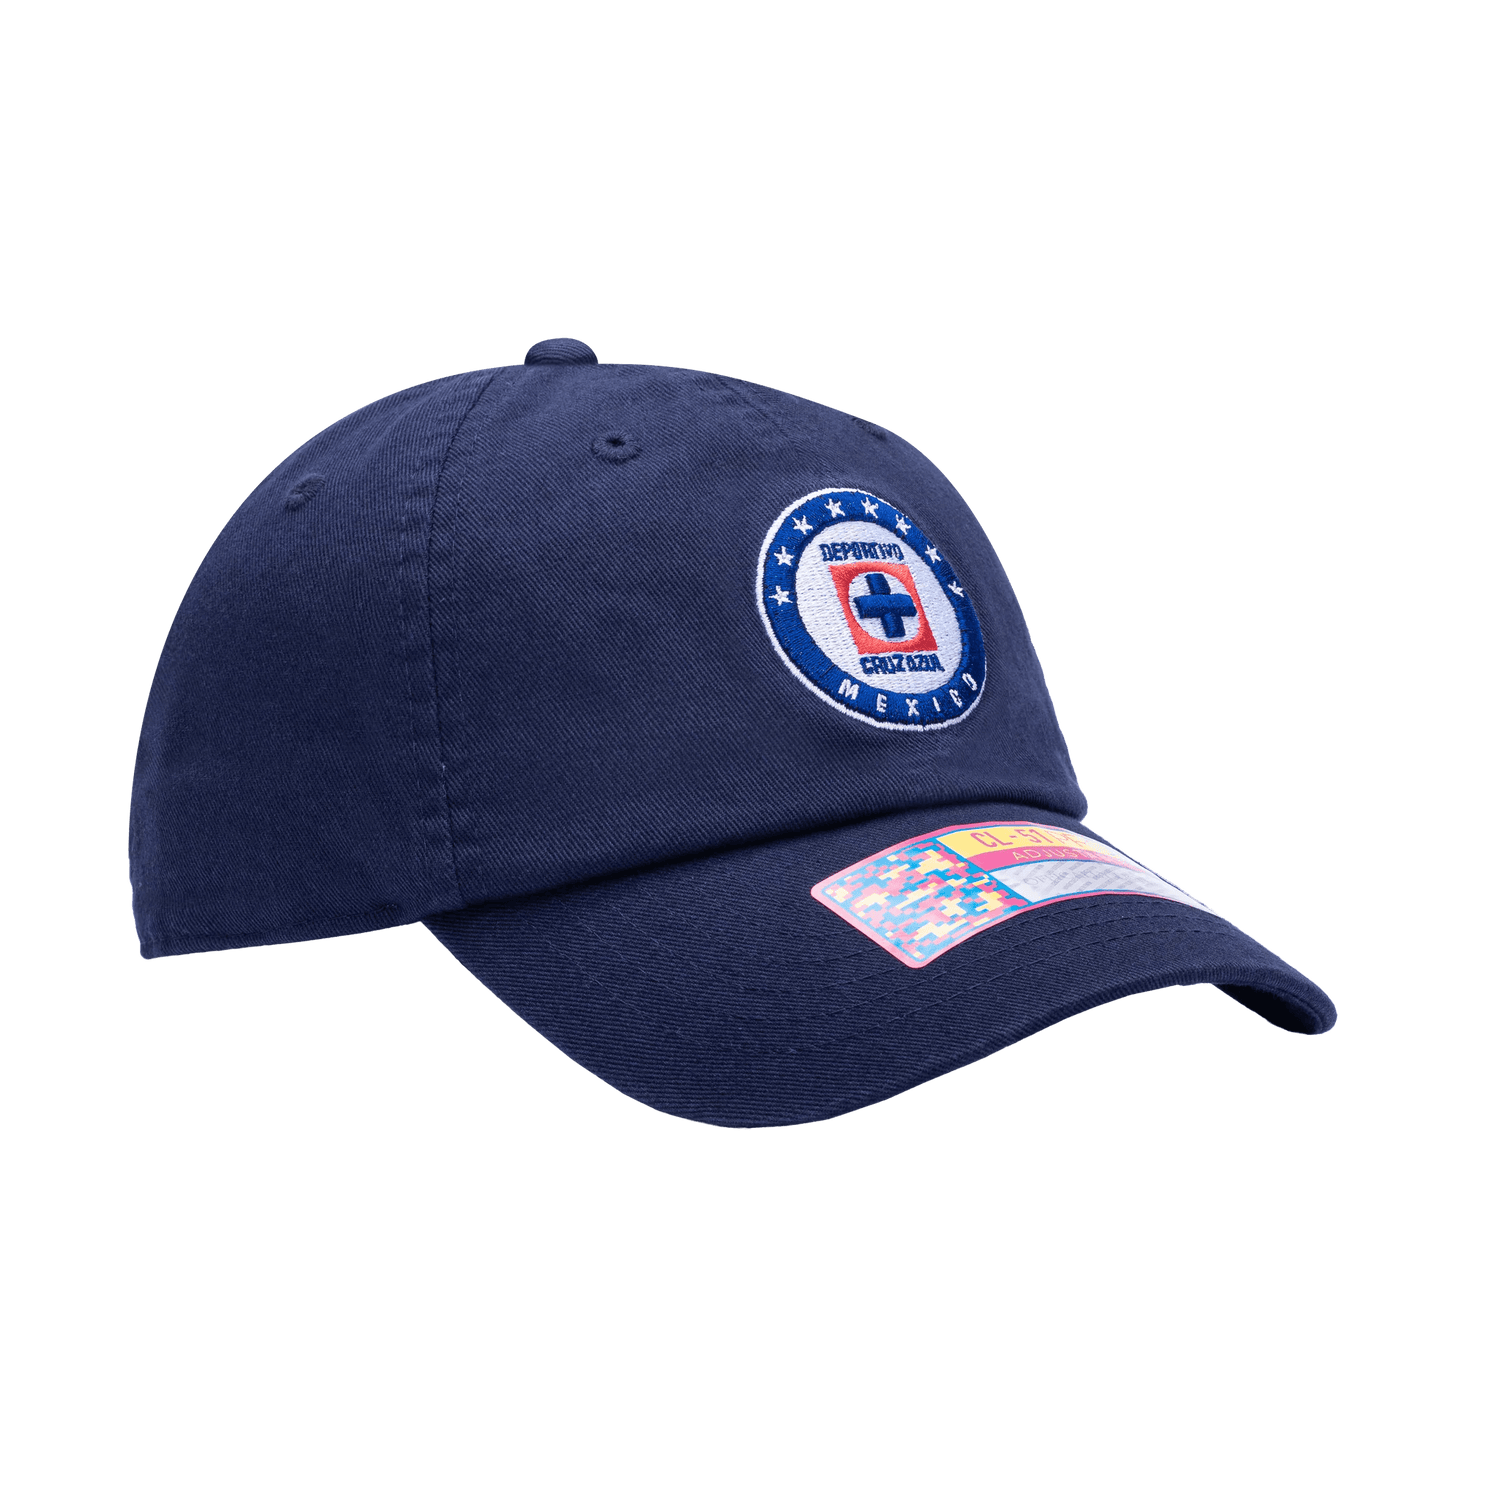 FI Collection Club Cruz Azul Bambo Classic Hat (Lateral - Side 2)